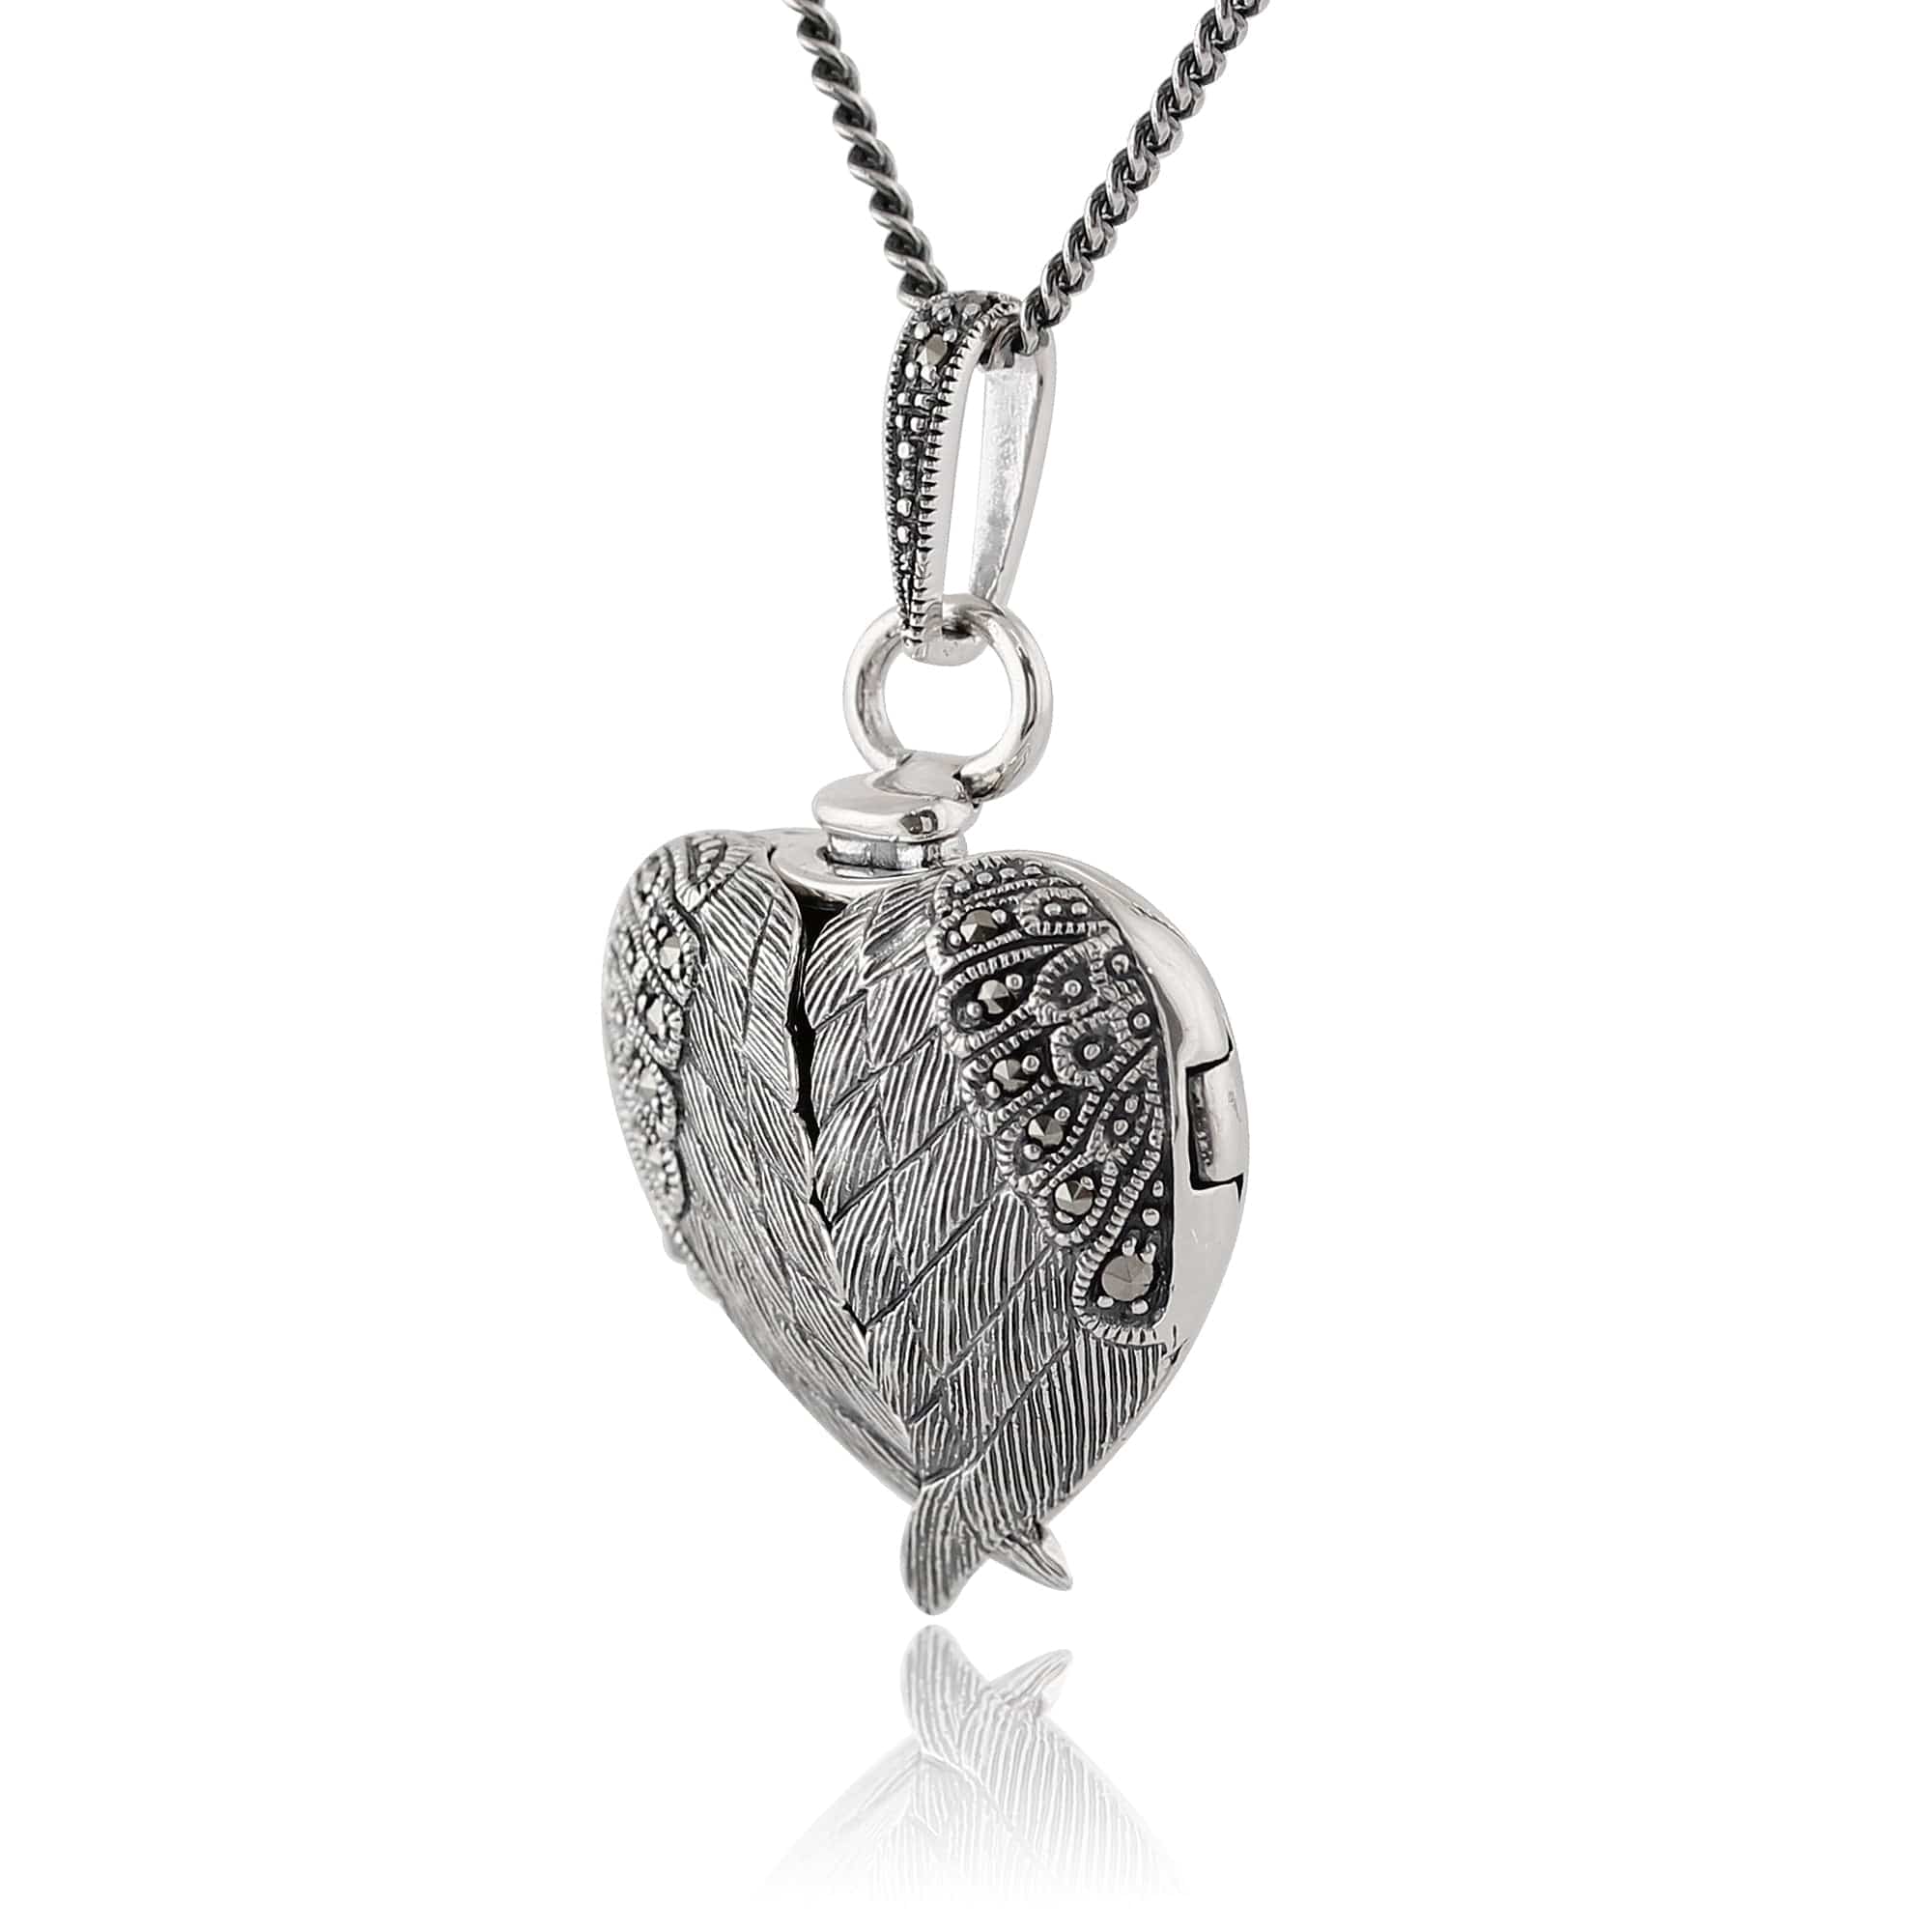 214N583601925 Art Nouveau Style Round Marcasite Angel Wing Heart Locket on Chain in 925 Sterling Silver 2